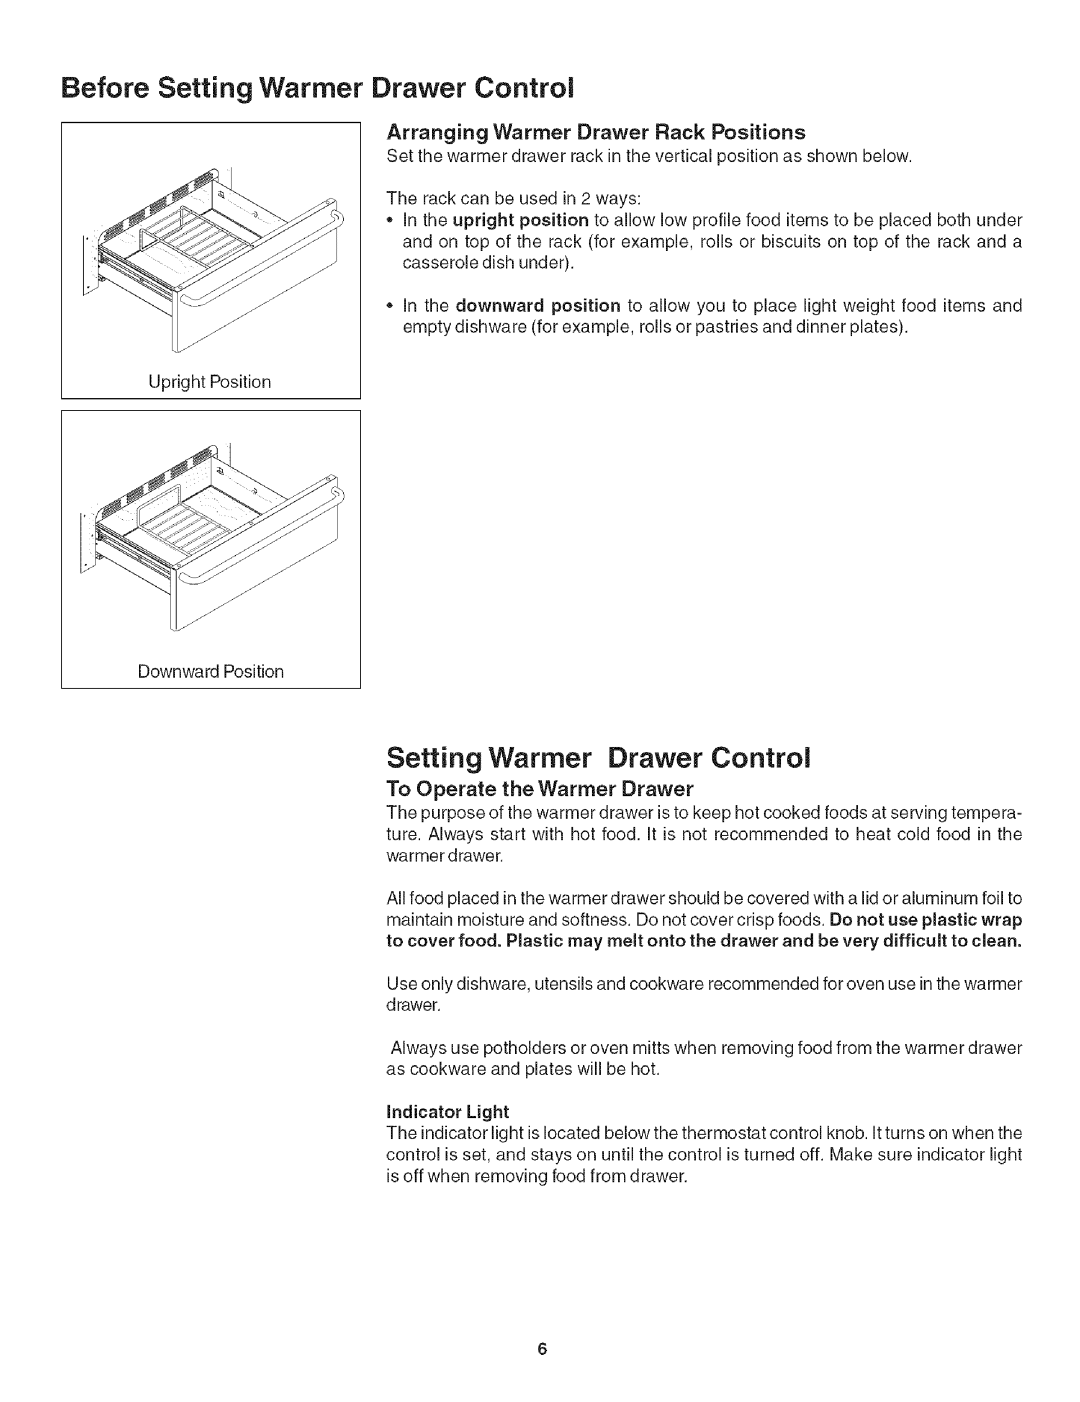 Kenmore 790.492 Before Setting Warmer Drawer Control, Arranging Warmer Drawer Rack Positions, To Operate the Warmer Drawer 